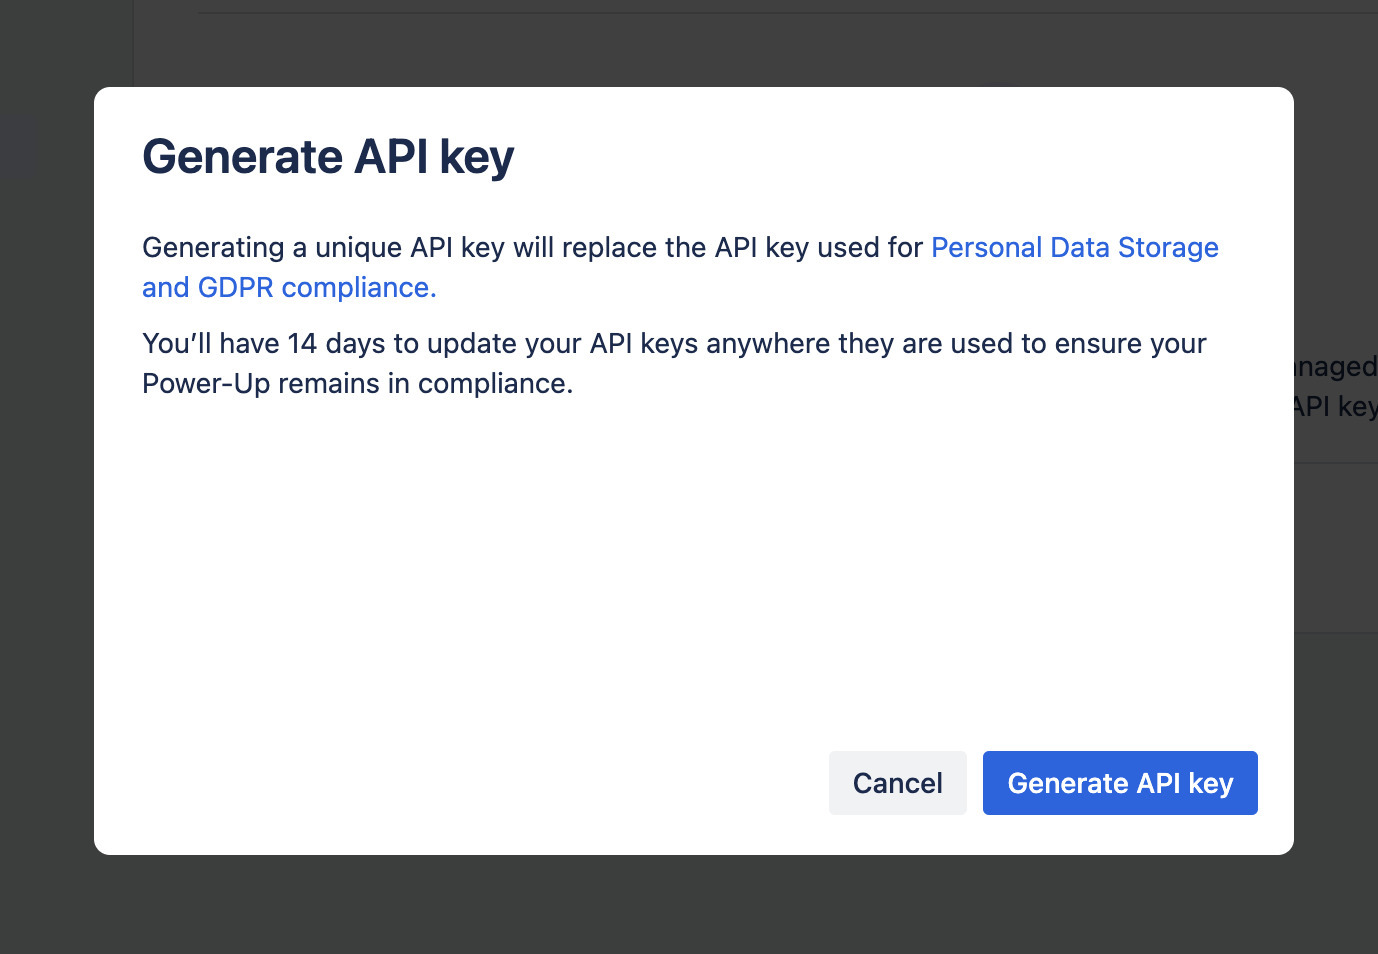 A pop-up with additional information on the API key